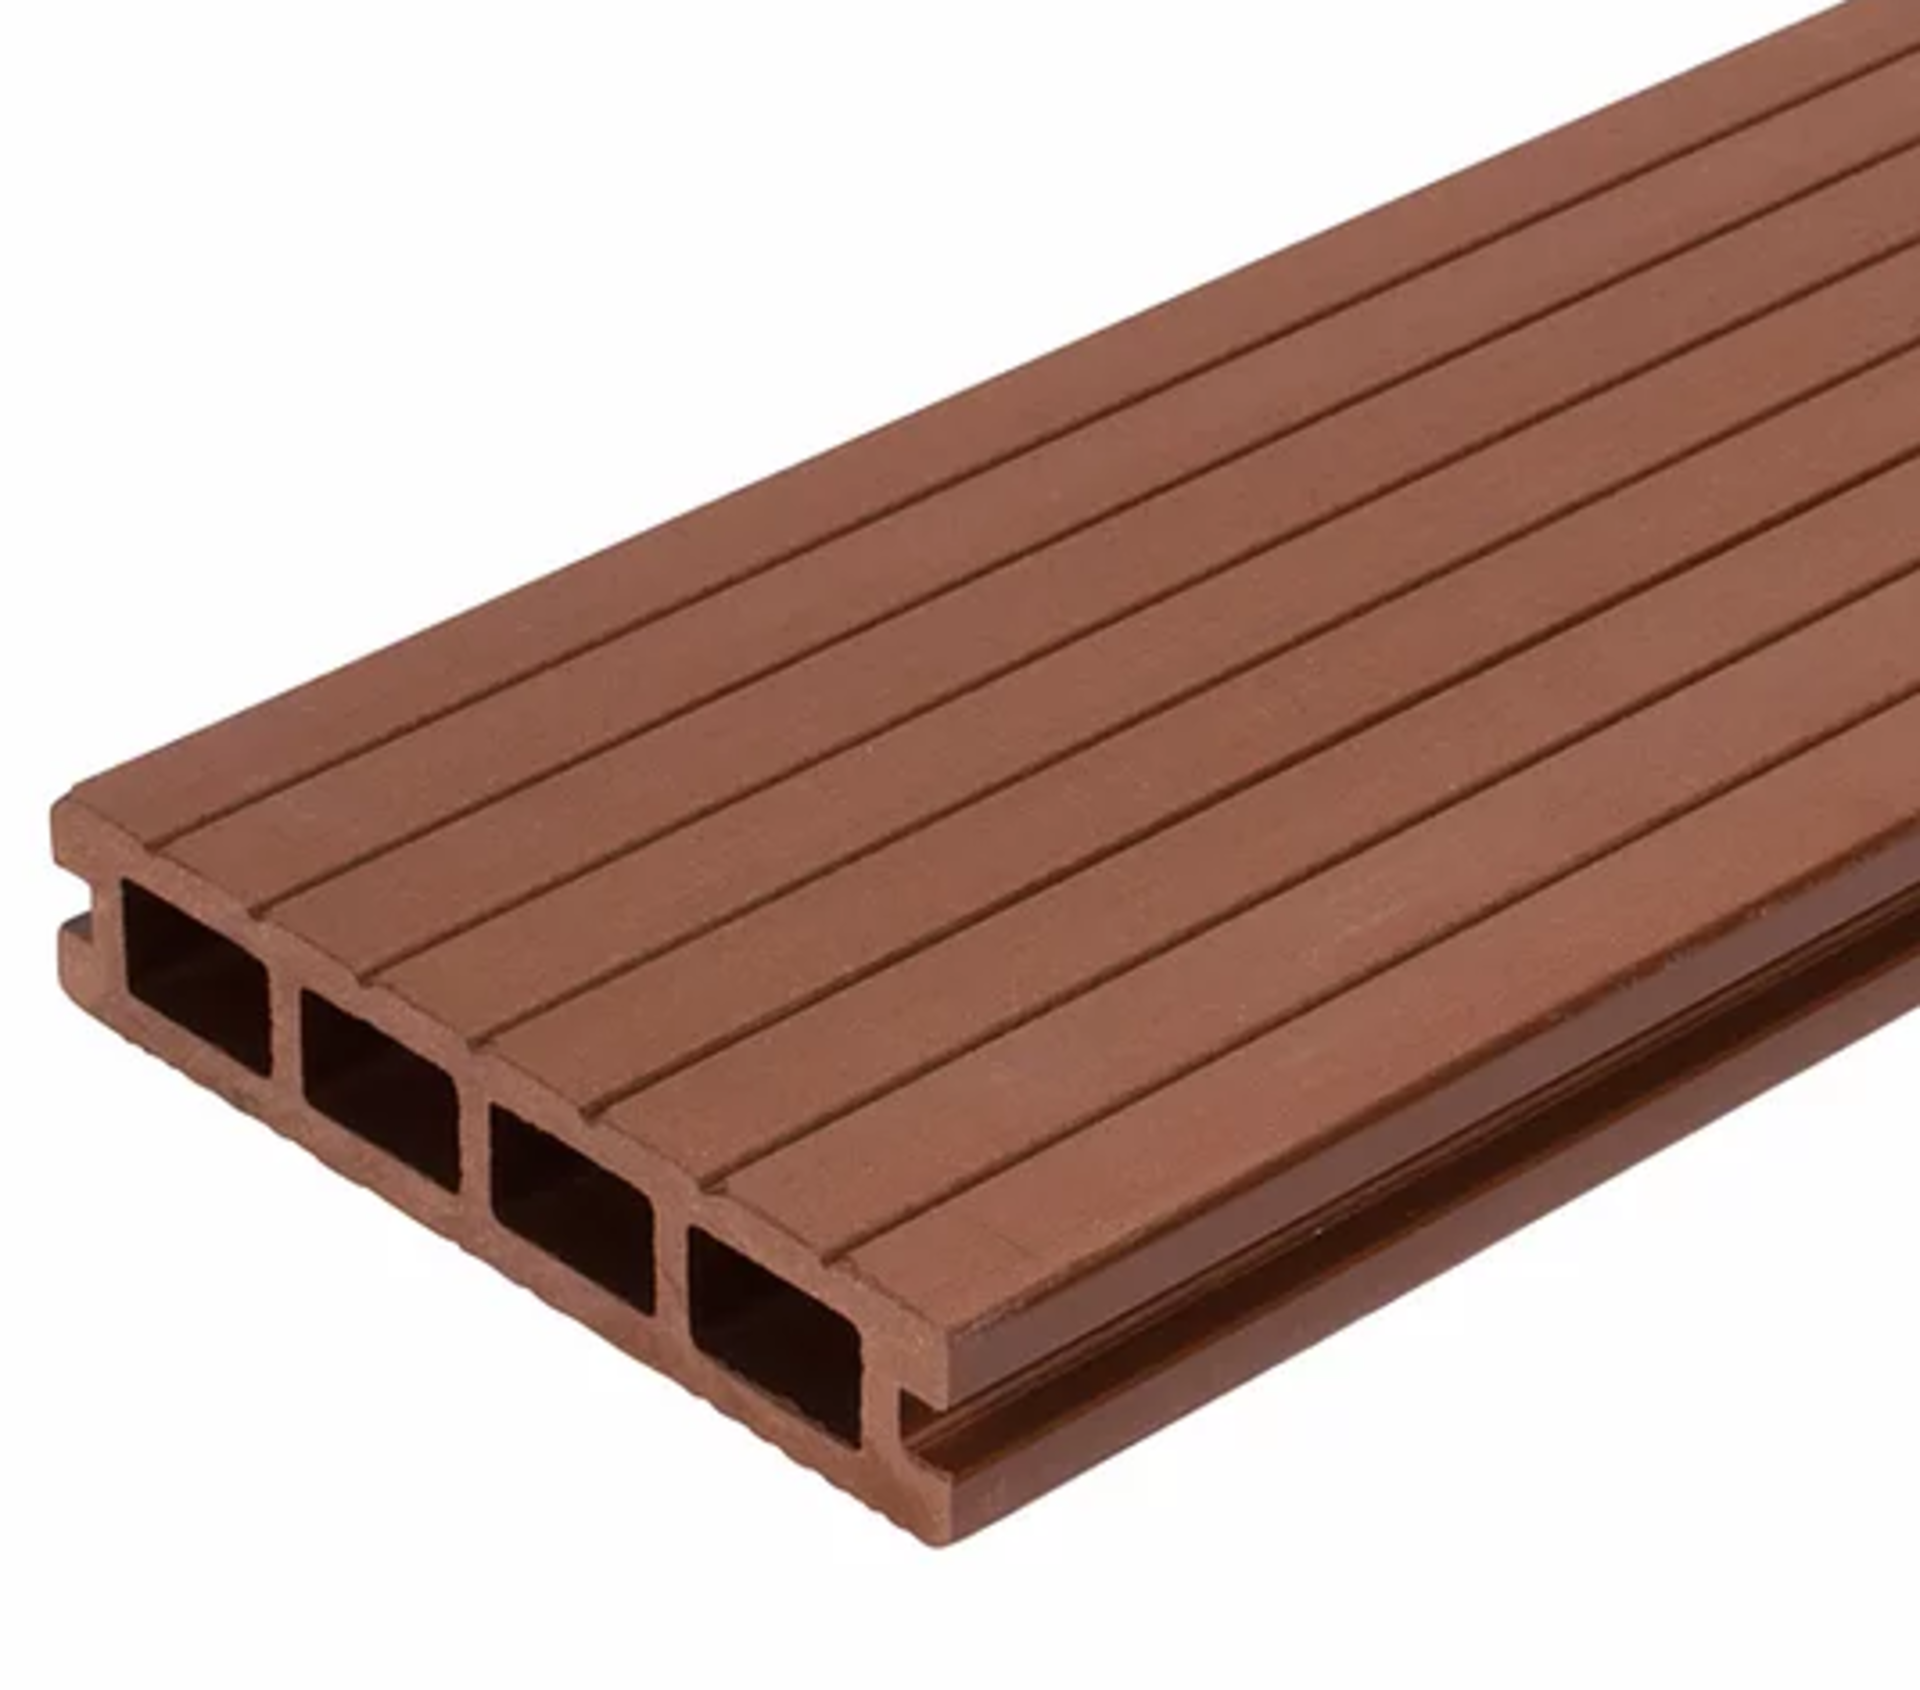 * 20 WPC Composite Coffee Double sided Embossed Woodgrain Decking Boards 2900mm x 146mm x 25mm - Image 4 of 5